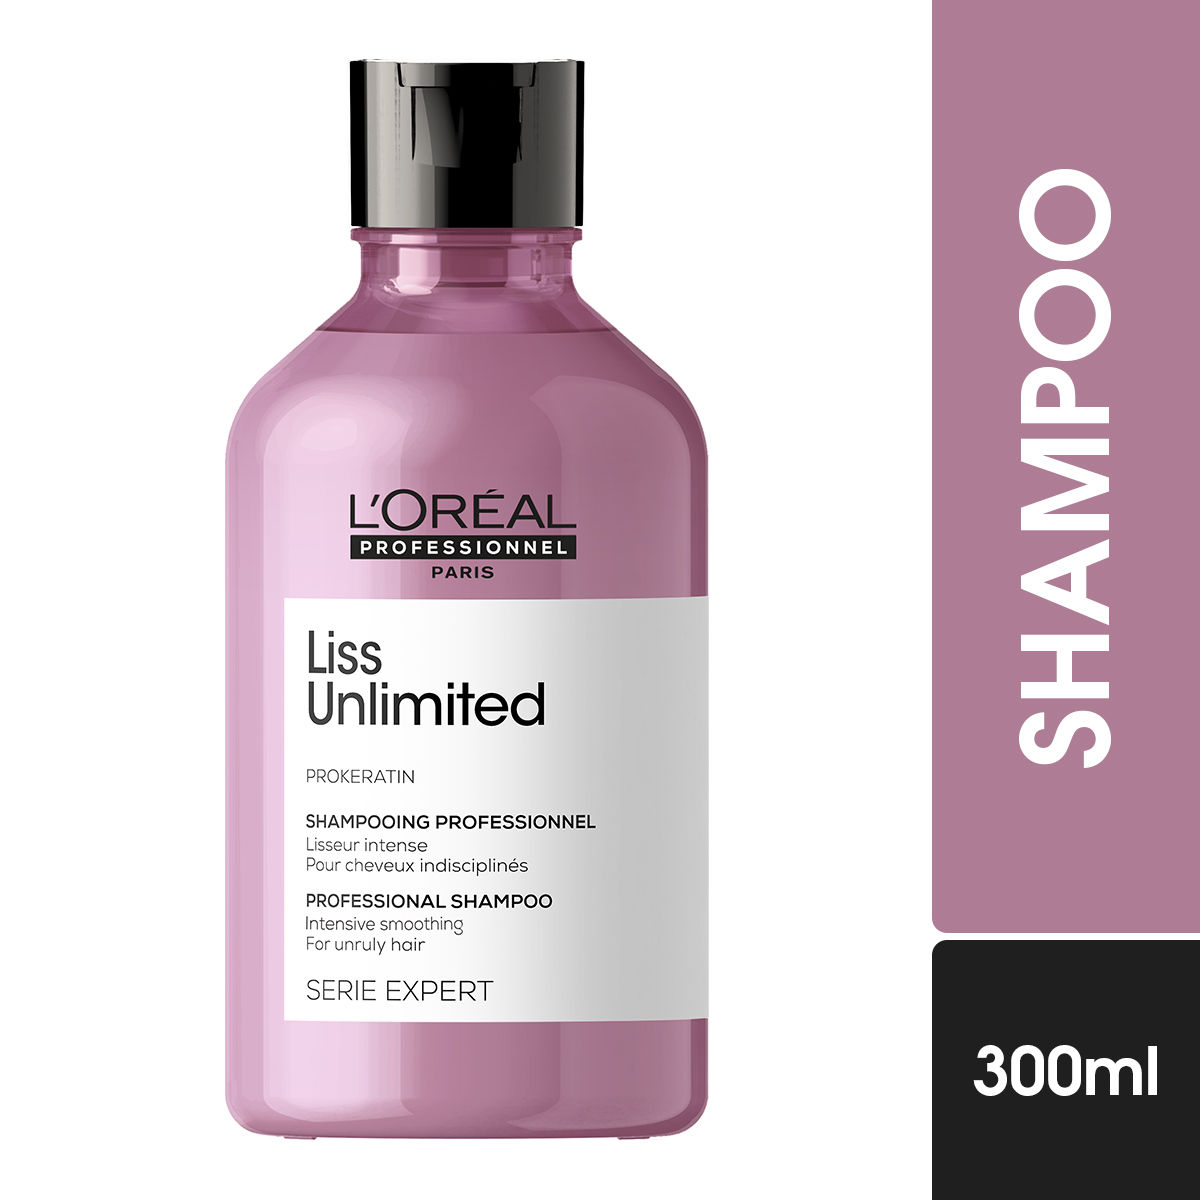 L'Oreal Professionnel Liss Unlimited Shampoo with Pro-Keratin and Kukui Nut Oil, Serie Expert